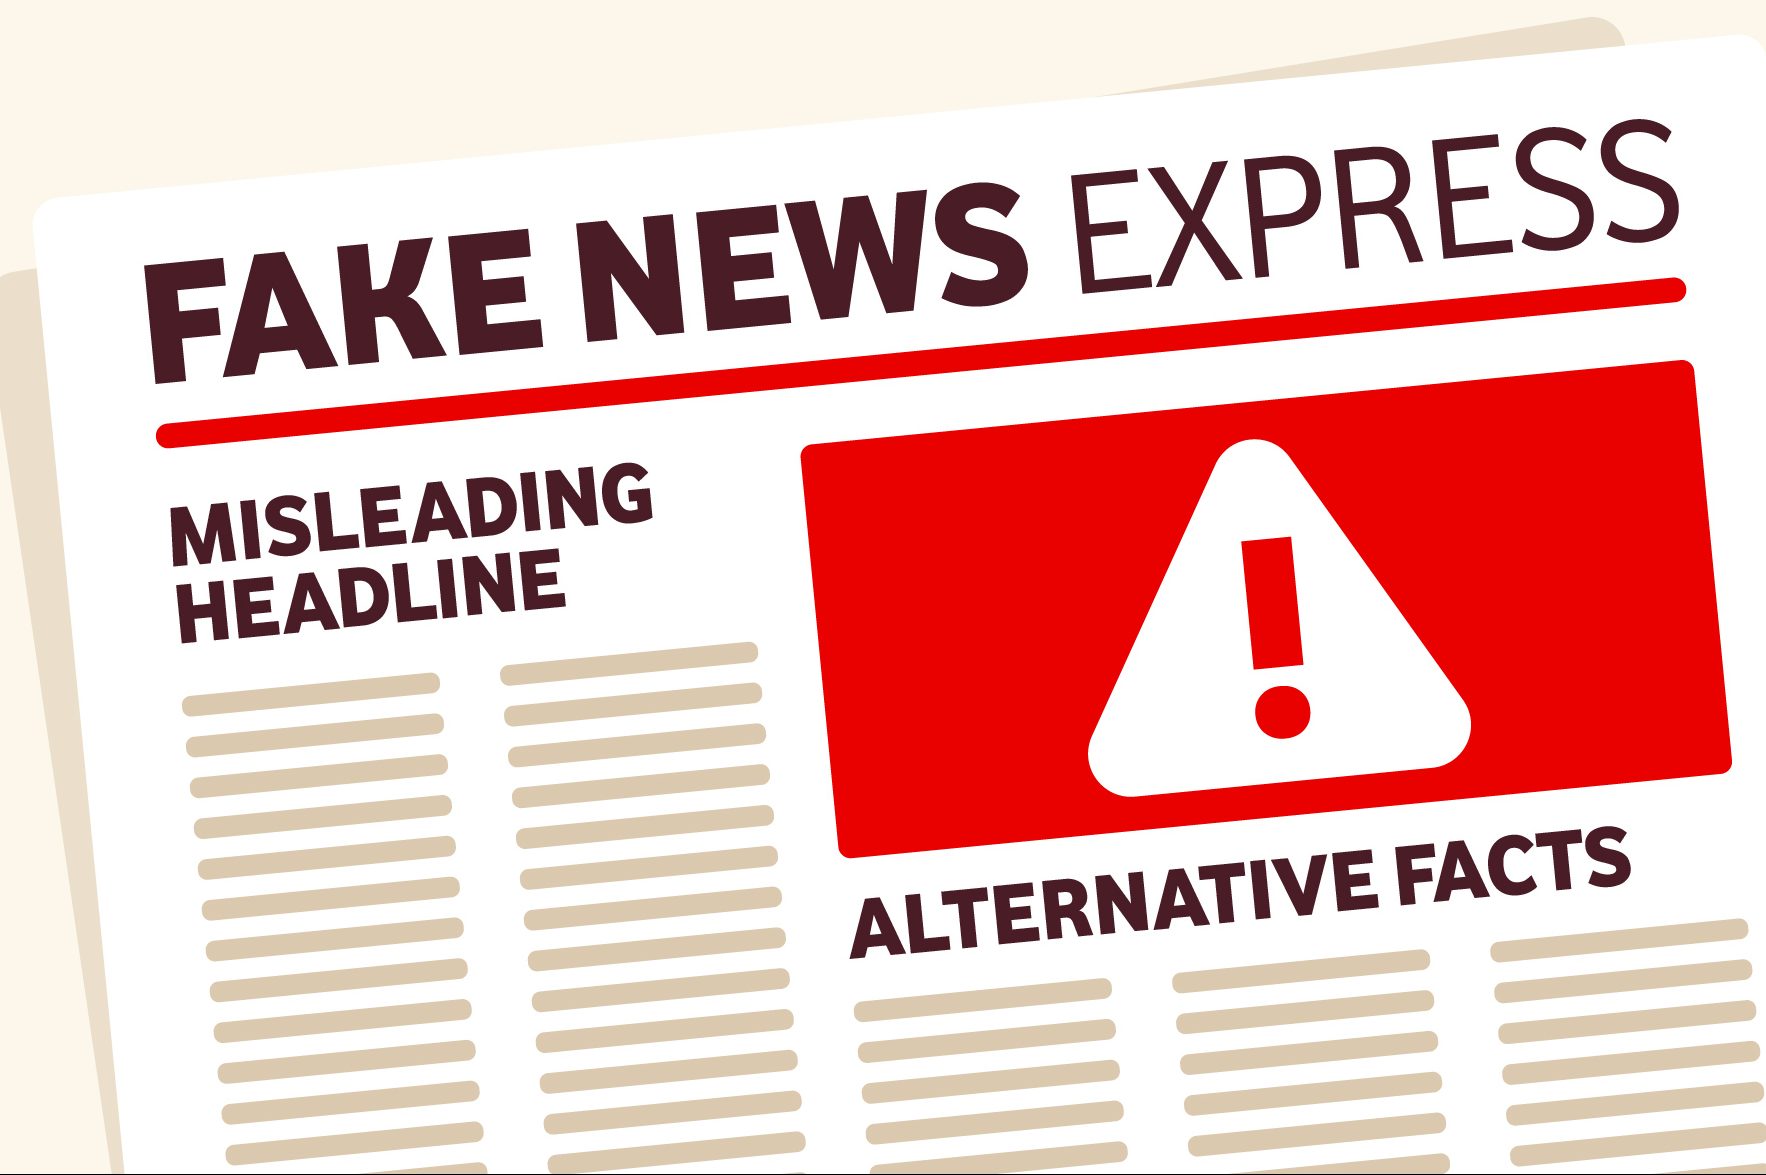 Fake News 46 Of Uk Teens Have Fallen For It Vodafone Research Suggests 